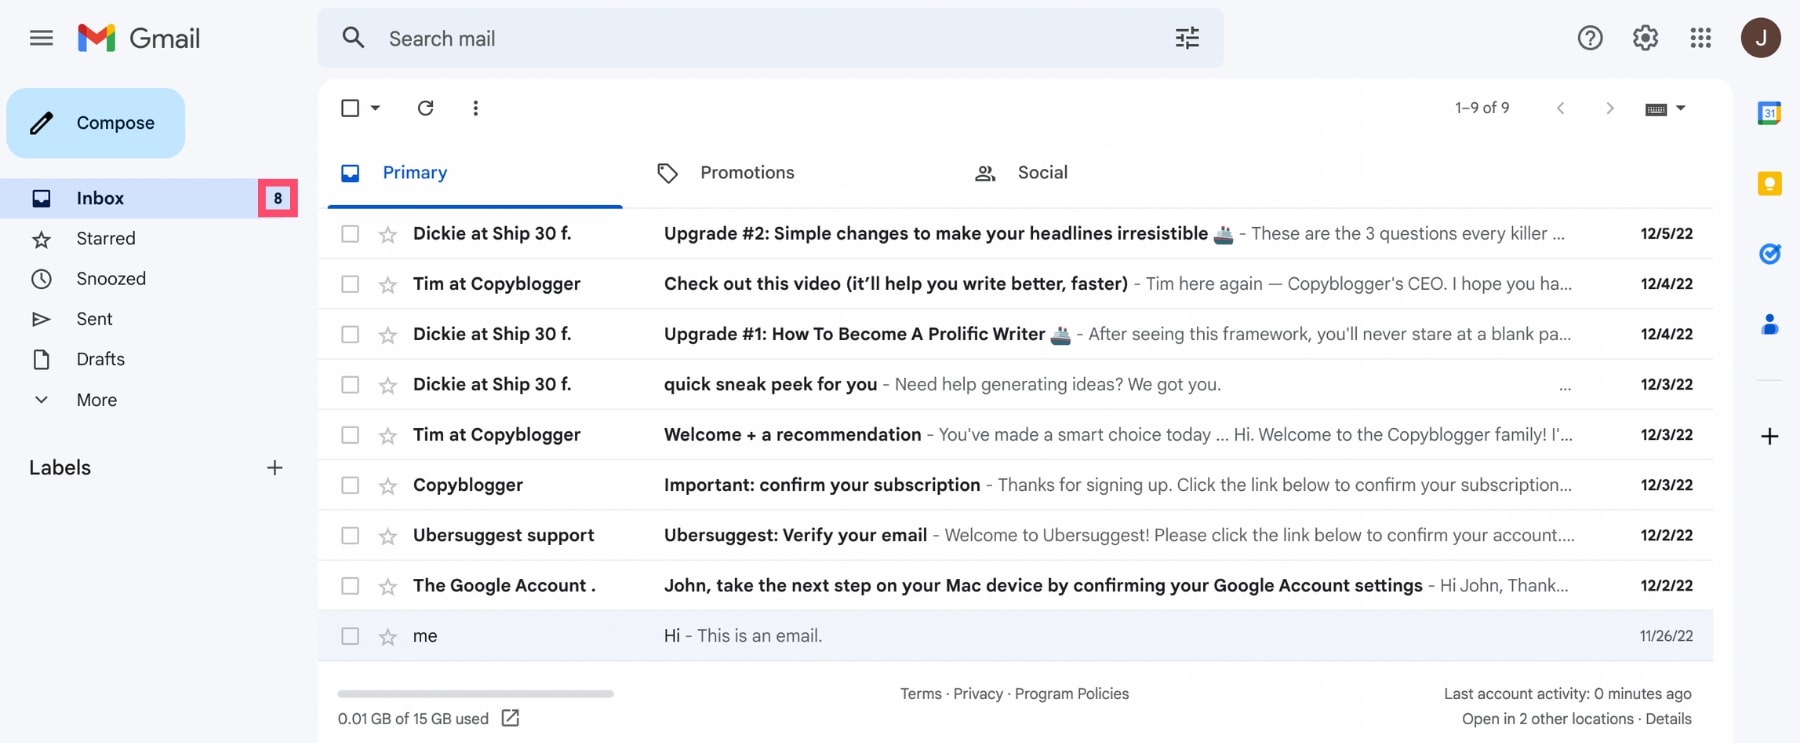 See unread emails in Gmail